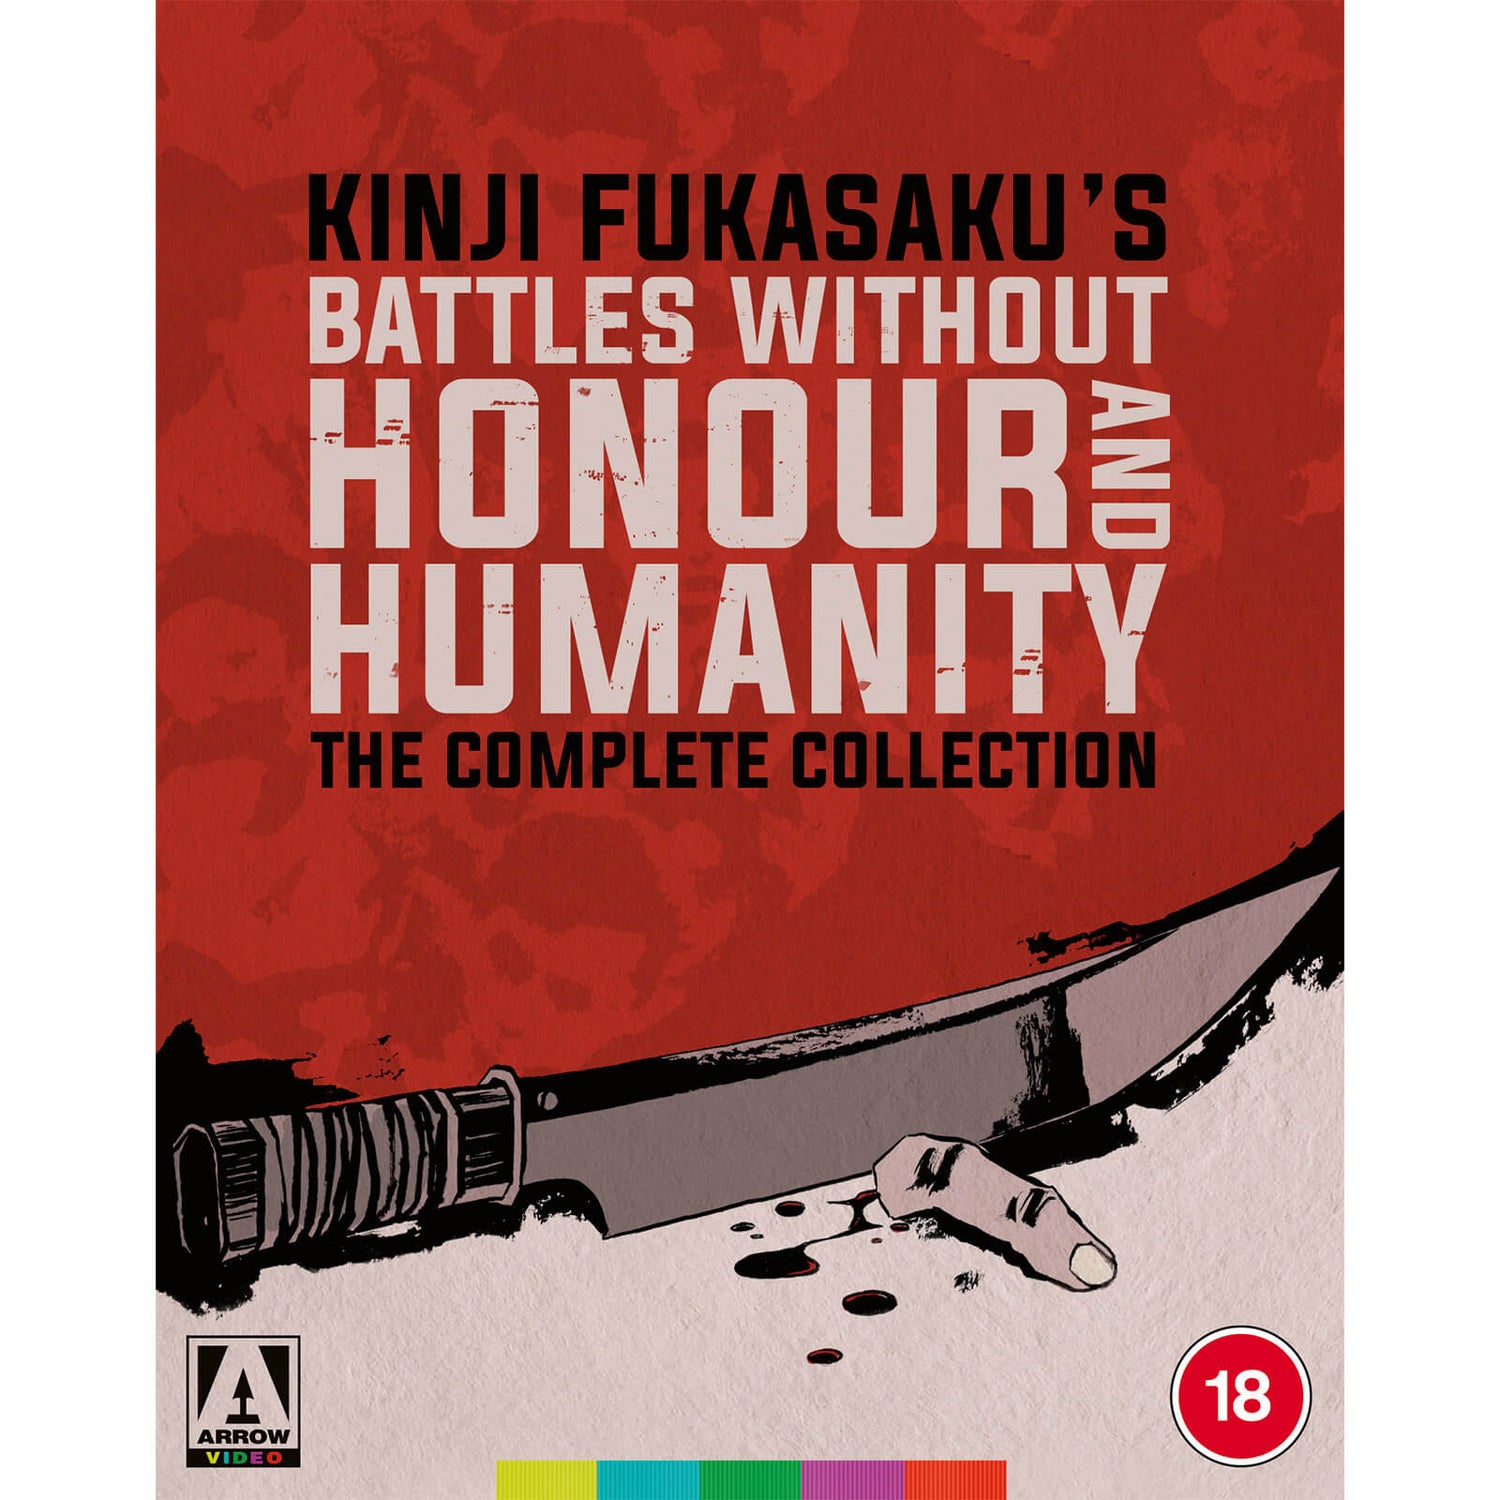 Battles Without Honor & Humanity Collection